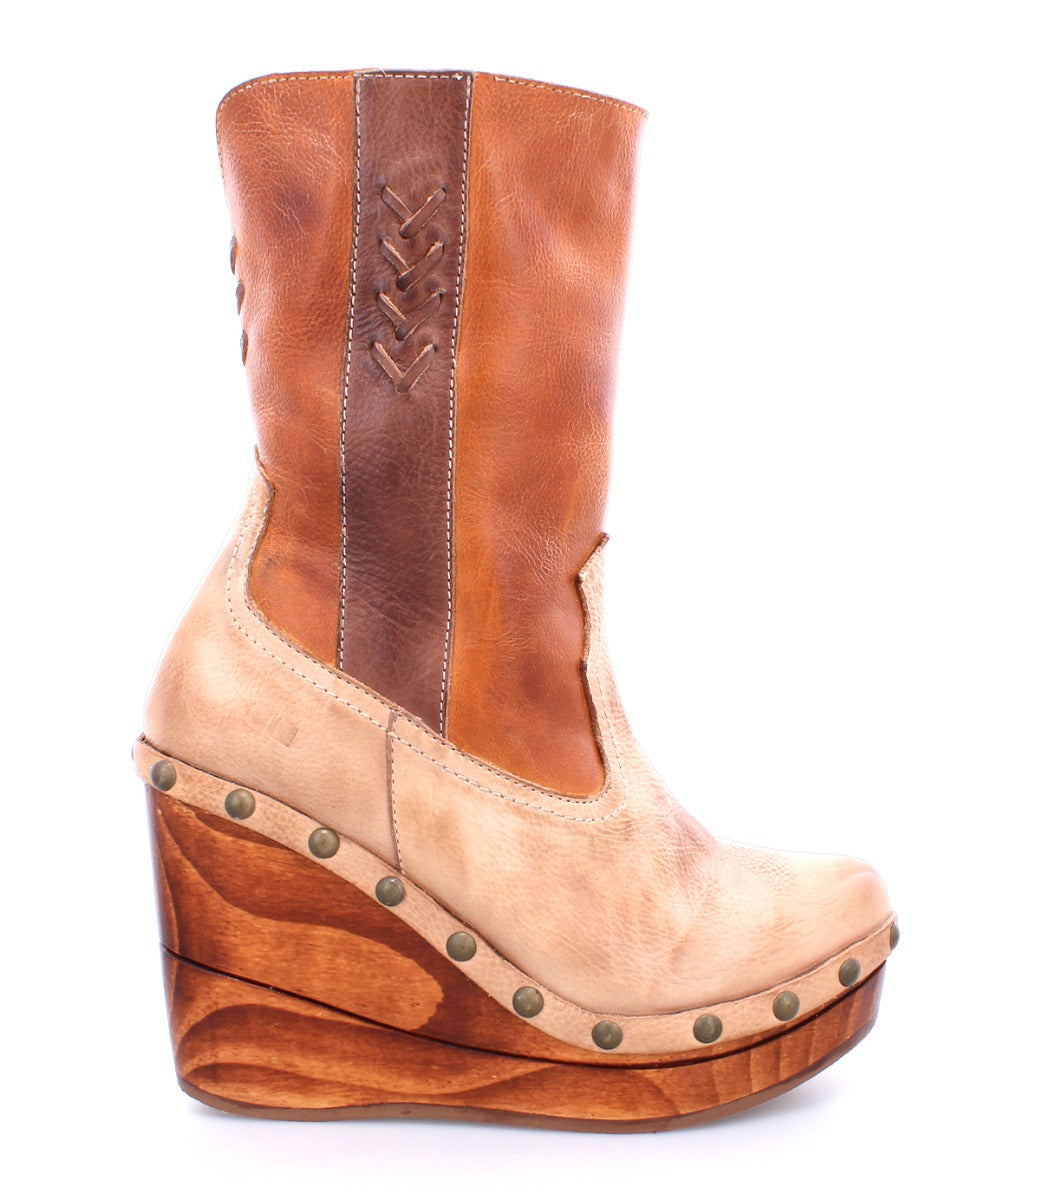 A women's Macarena wedge boot with tan and brown accents by Bed Stu.